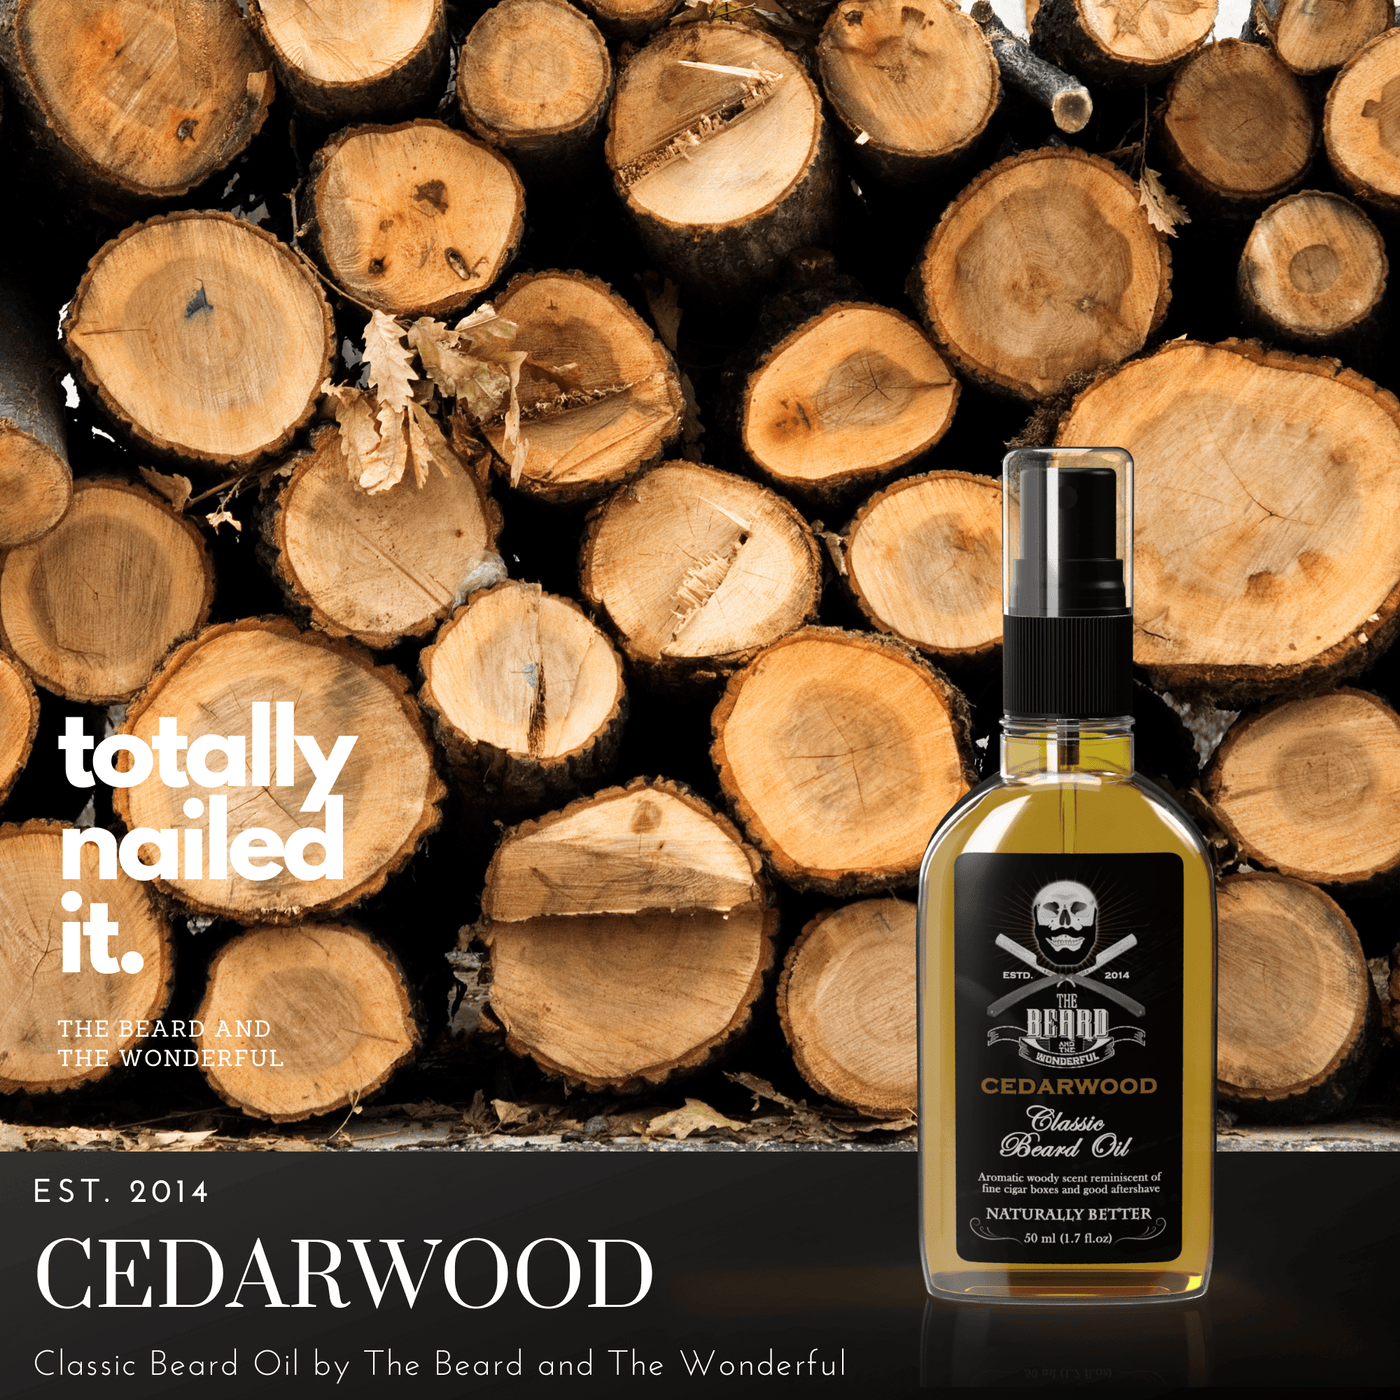 Classic Beard Oil 50ml (1.7 Fl Oz) Bottle Conditioning, Strengthening, Softening, Revitalizing Blend (Natural and organic ingredients) Beard Oil The Beard and The Wonderful Cedarwood 